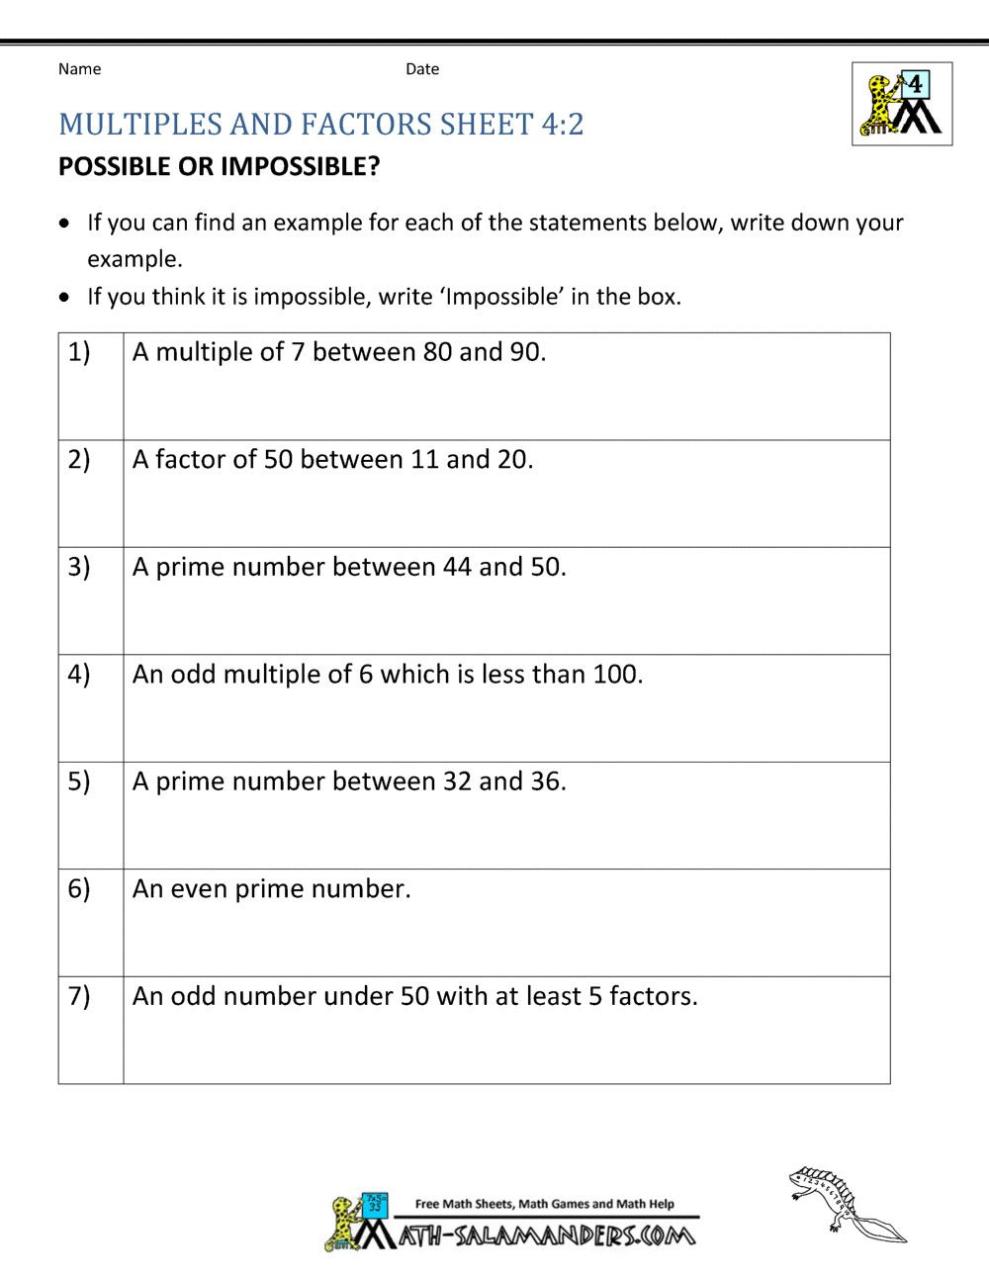 Converting From Standard Form To Vertex Form Worksheet Answers